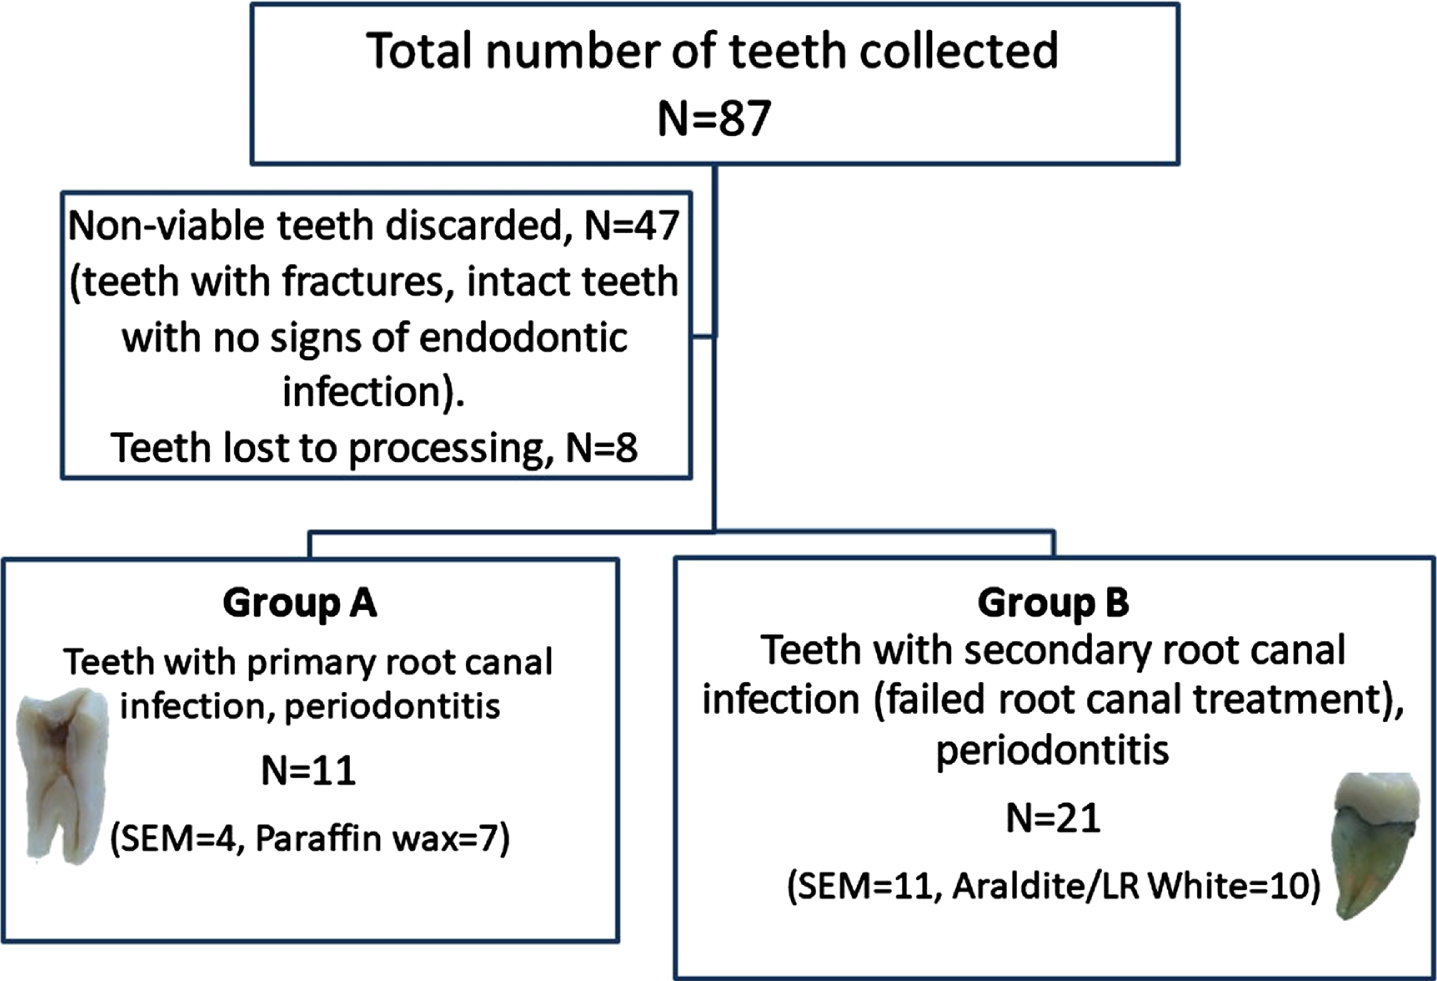 Flowchart of the study. A flowchart of the study shows the total number of freshly extracted teeth collected from NHS dental practices (N = 87), of which 47 teeth were found to be non-viable due to stated reasons and 8 teeth were lost due to processing. The study groups were divided into teeth with primary root canal infection and periodontitis (Group A, N = 11) and teeth with secondary root canal infection (failed root canal treatment) and periodontitis (Group B, N = 21). In Group A, 4 teeth were processed for SEM imaging and 7 teeth were processed for paraffin wax embedding. In Group B, 11 teeth were processed for SEM imaging and 10 teeth along with gutta-percha were divided up for LR White resin and Araldite.